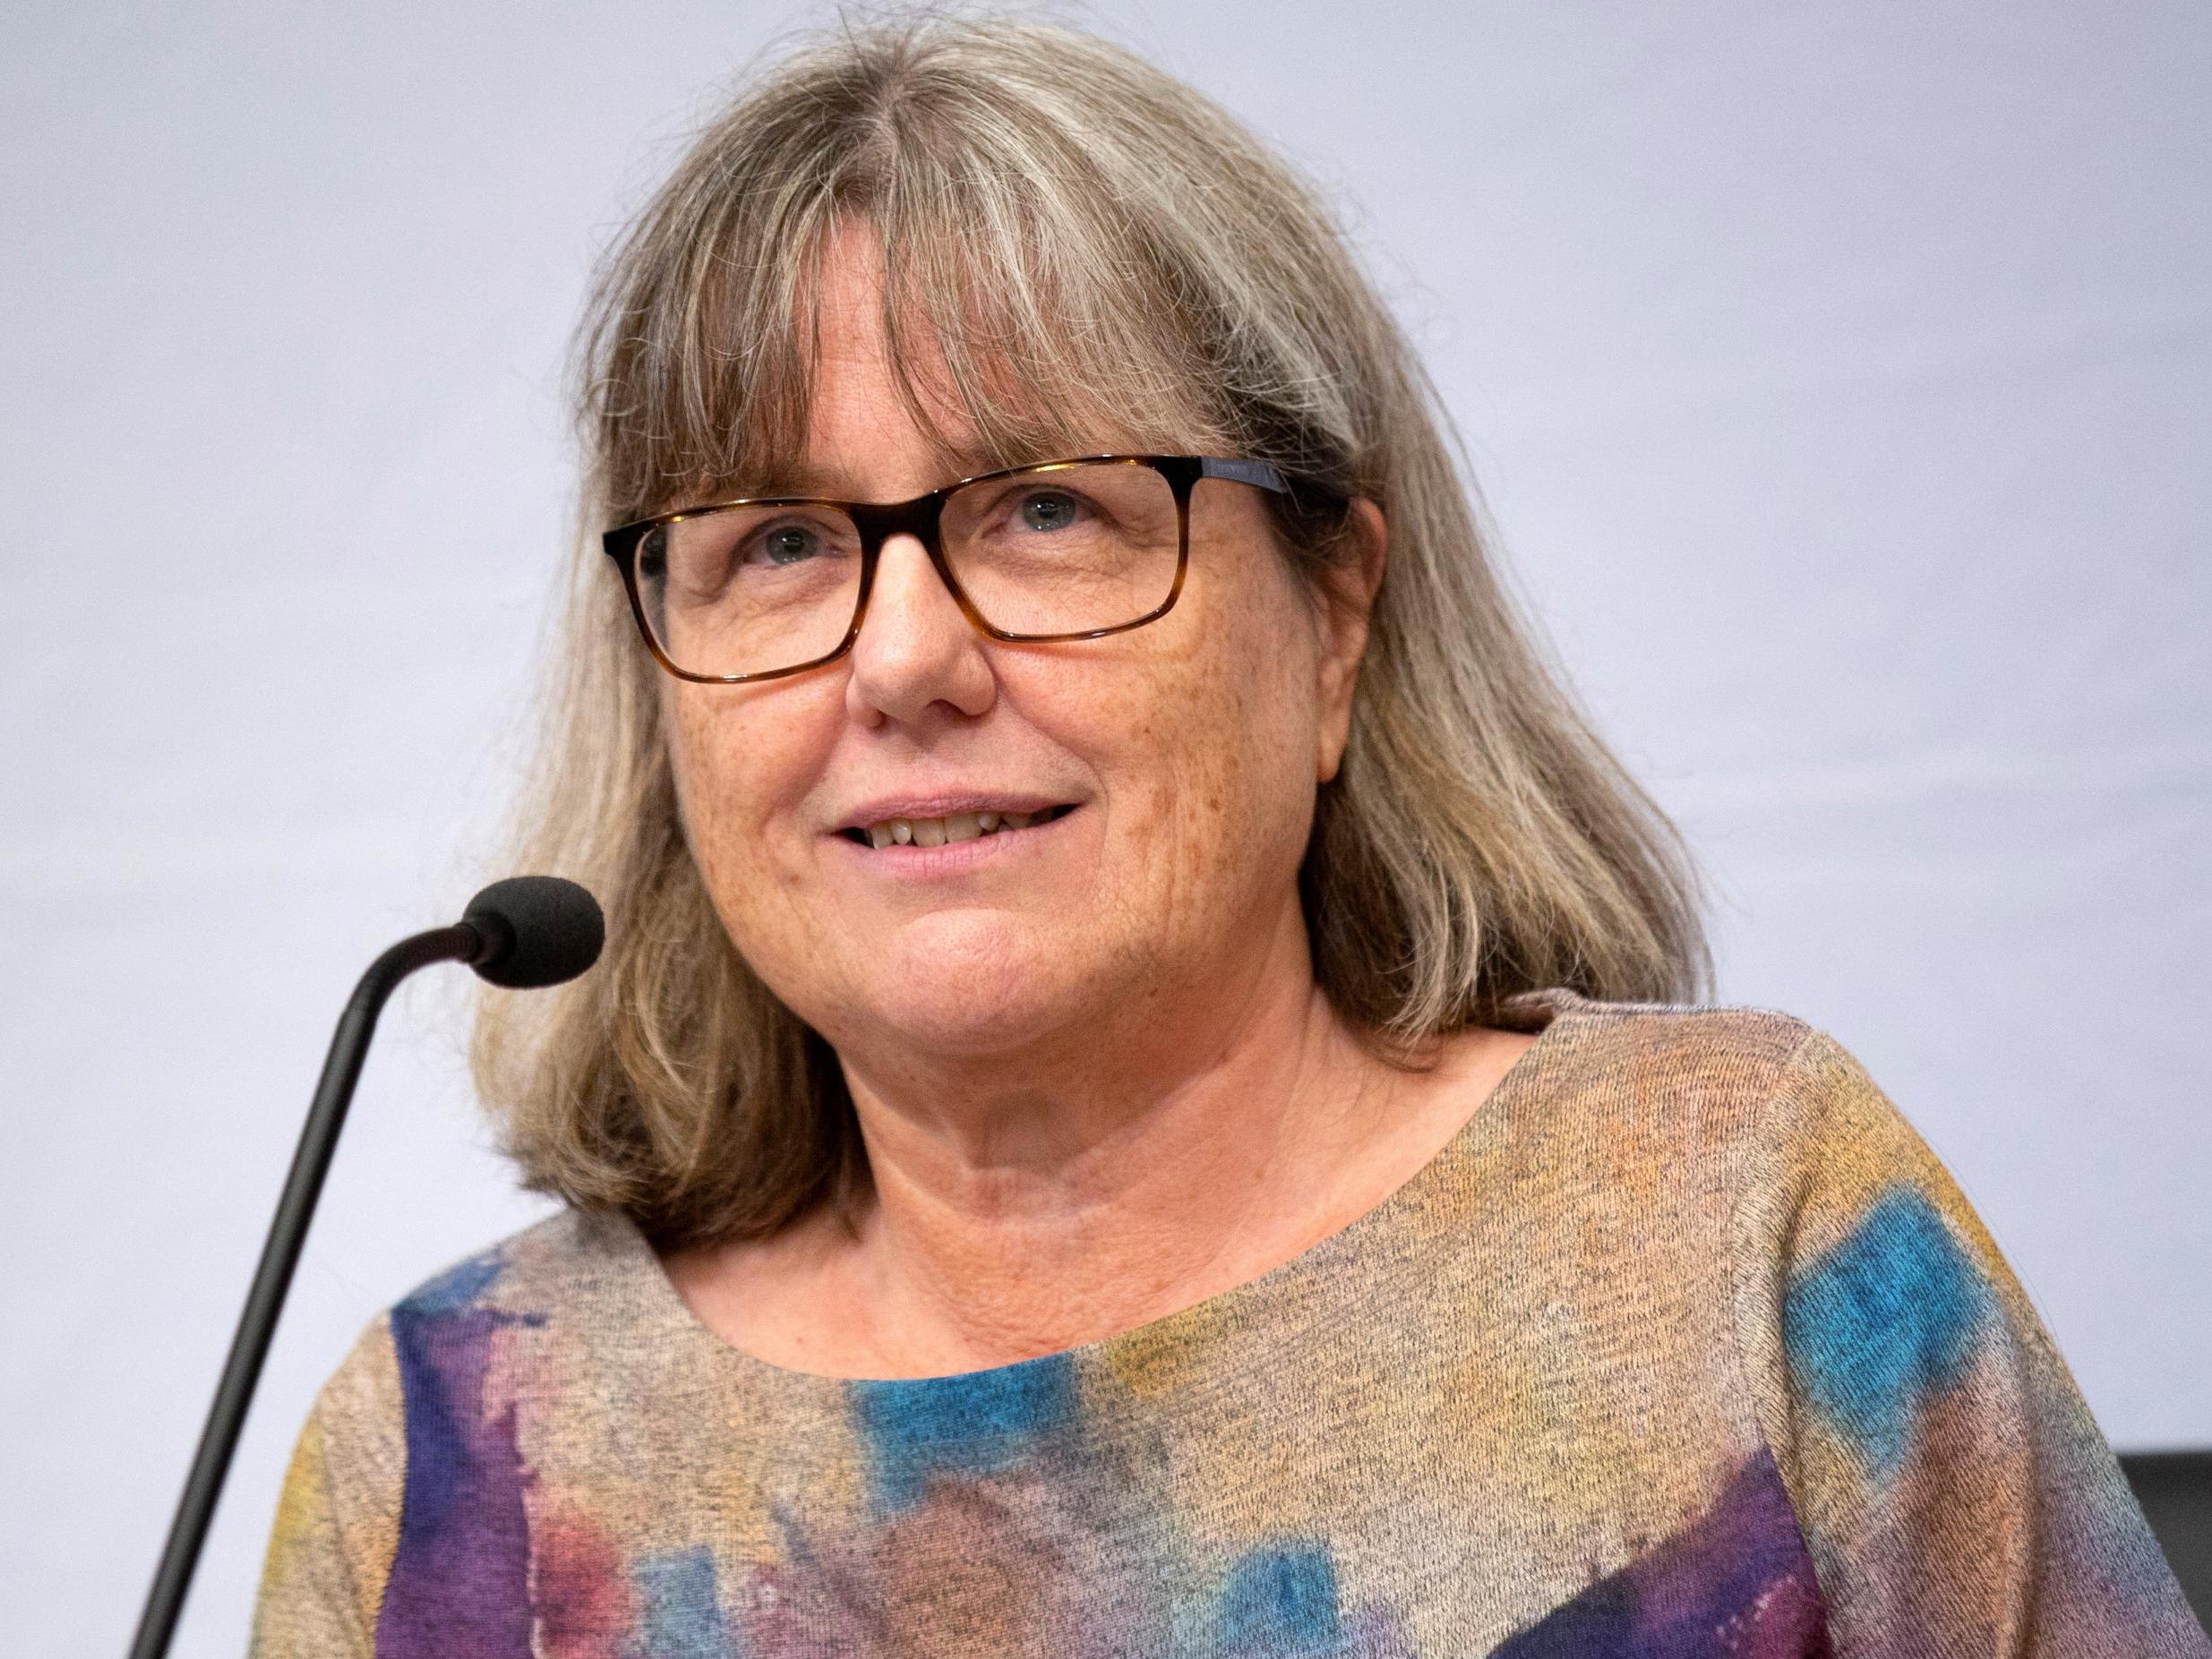 Donna Strickland is the first female Nobel laureate since 2015